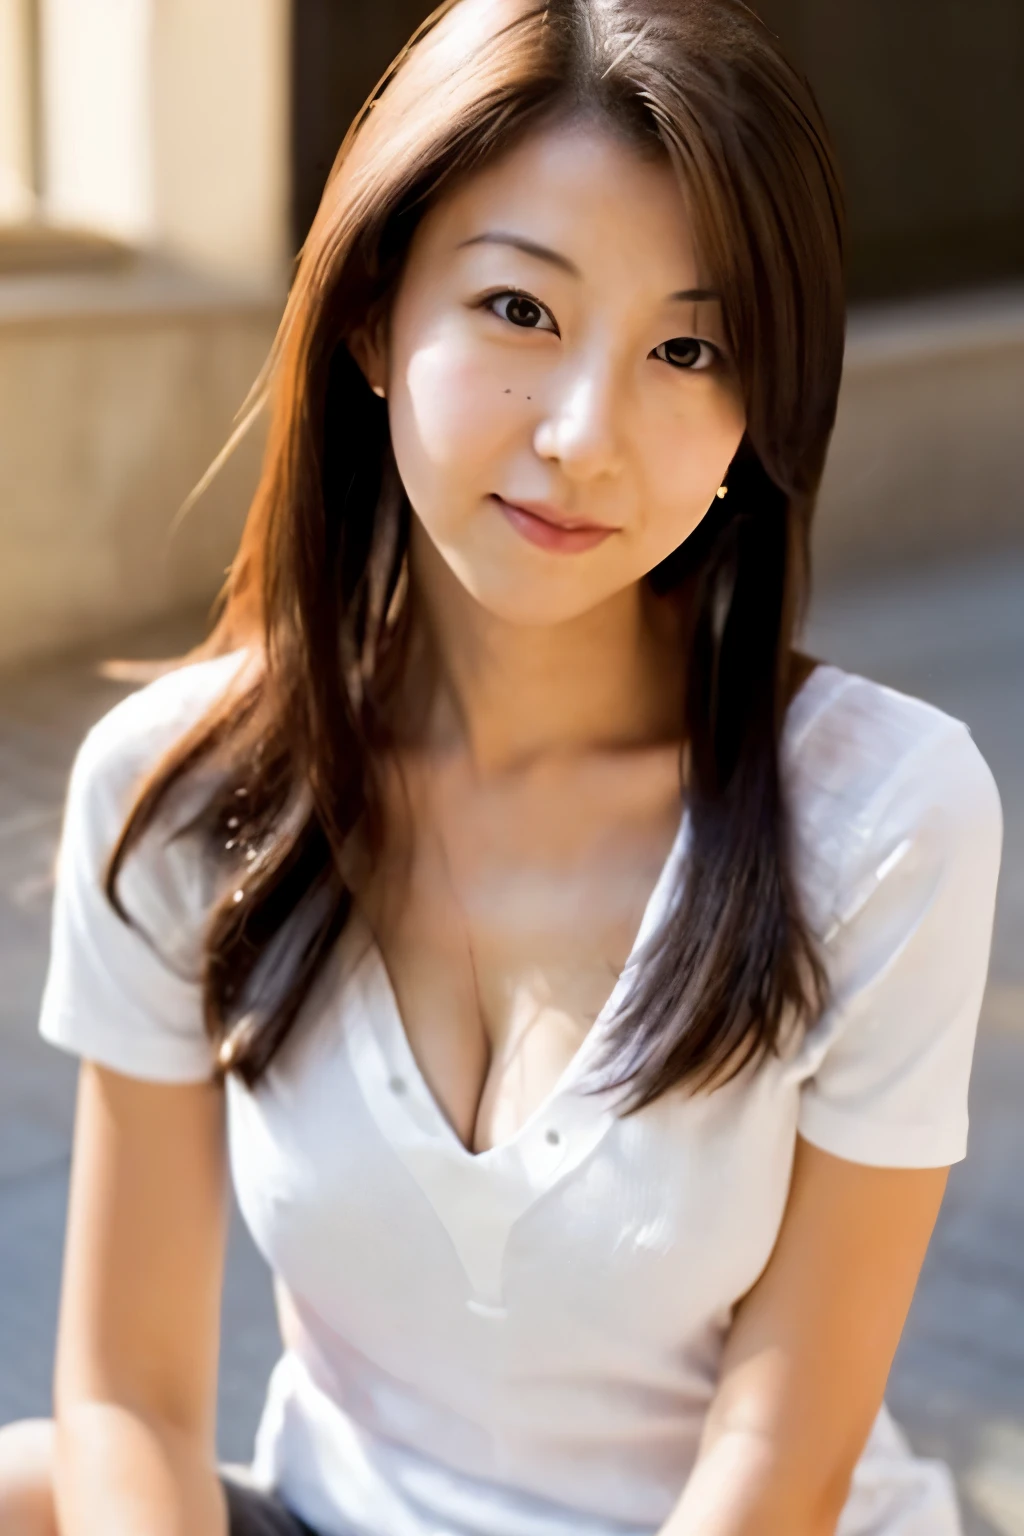 (8K, RAW photo, high quality, High resolution:1.1), Skinny Japanese woman, 30 years old, small breasts, very thin waist, (hyperrealistic:1.4), (realistic, photorealistic:1.3), soft light, realistic face, small face, cute face, realistic body, realistic skin, disorganized, masterpiece, (cute:1.8), (leaning forward:1.8), (From above:1.2), (close:1.4), (crawl on all fours), (white loose t-shirt:1.2), (Beautiful breasts:0.9), (long hair, ponytail), ((cleavage)), fine black eyes, innocent eyes, droopy eyes, Watery eyes, open lips, blush, good style, cinema light, film Grain, look viewer, full Body, Depth of field, blurred background, Eye focus, young, 85mm lens, f/1.4, professional lighting, portrait, photon mapping, radio city, Physically based rendering, Transparency, Day book girl, Day, Sunny, outdoor